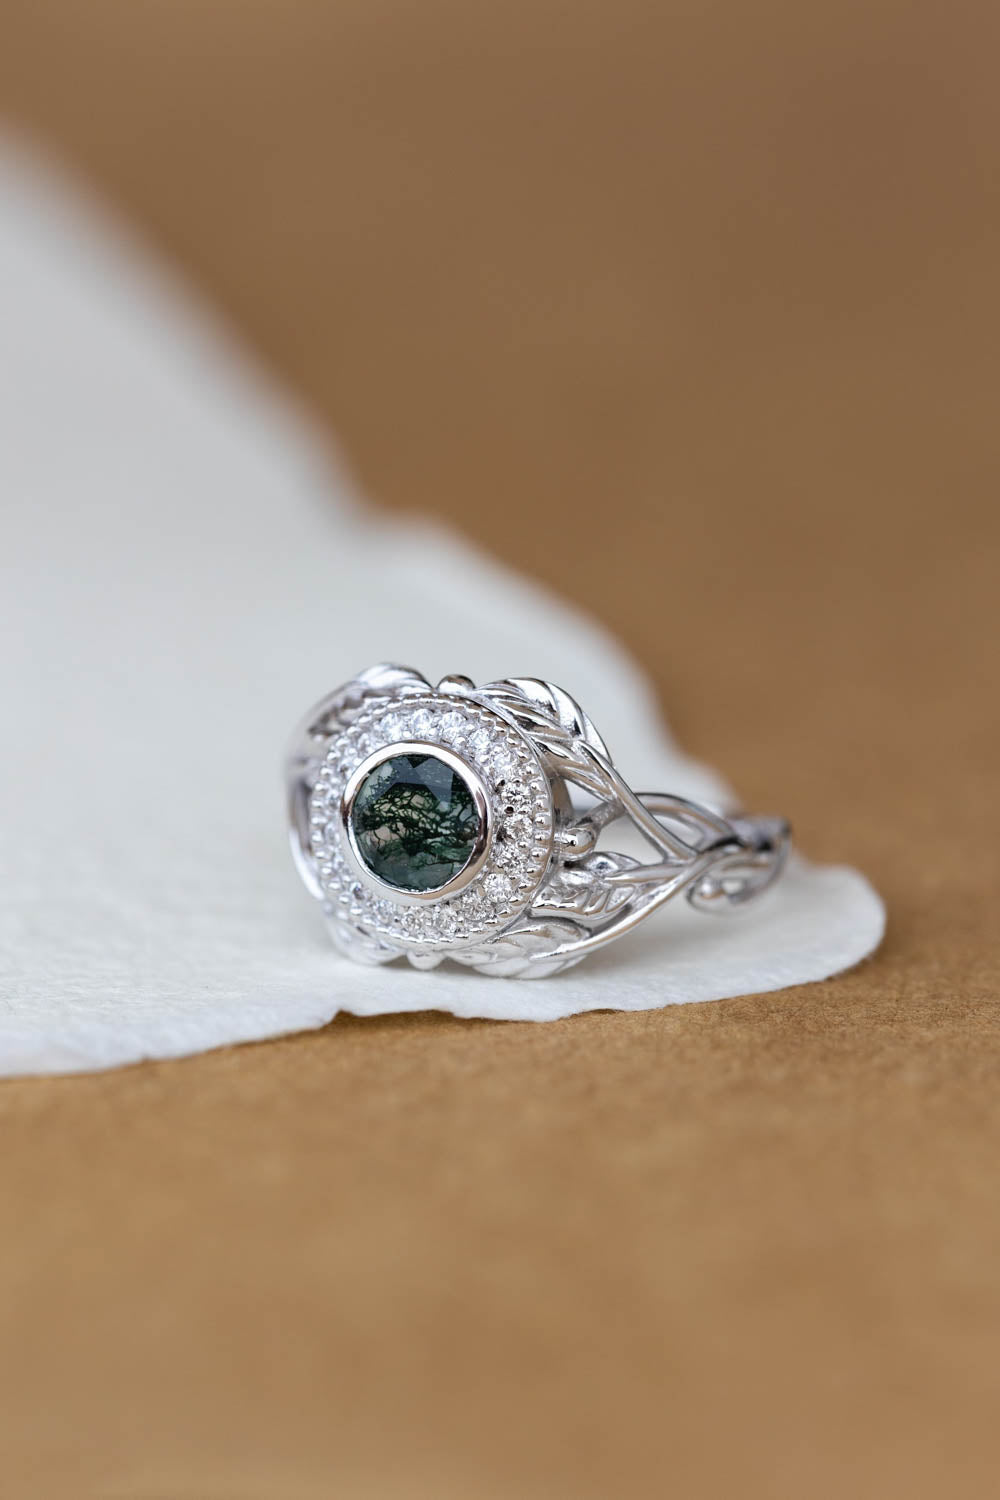 Moss agate and diamond halo engagement ring, nature themed gold branch ring  / Tilia halo - Eden Garden Jewelry™